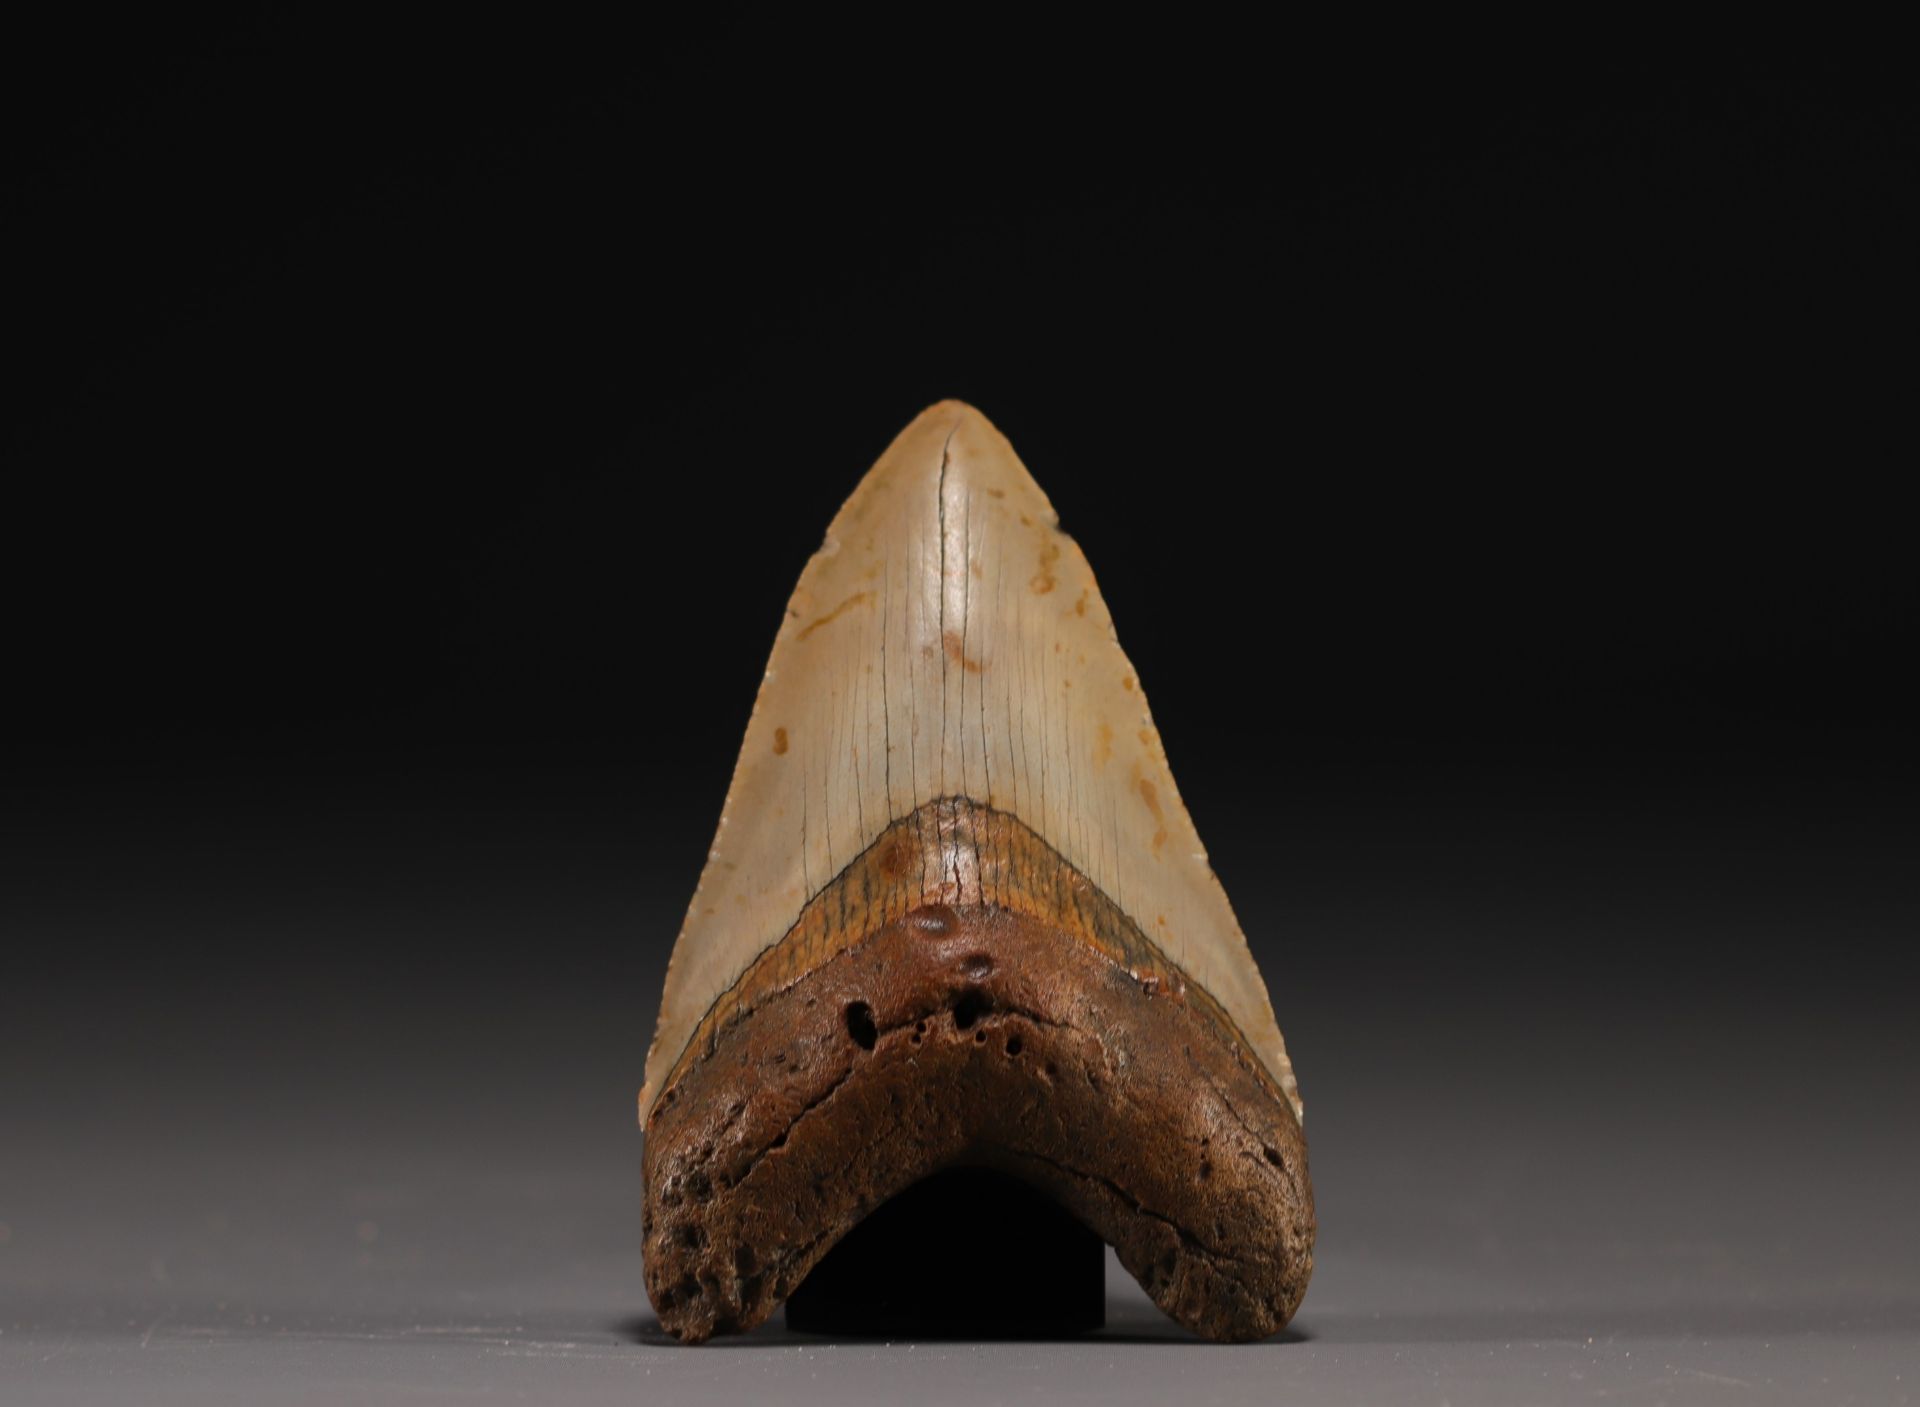 Megalodon's tooth